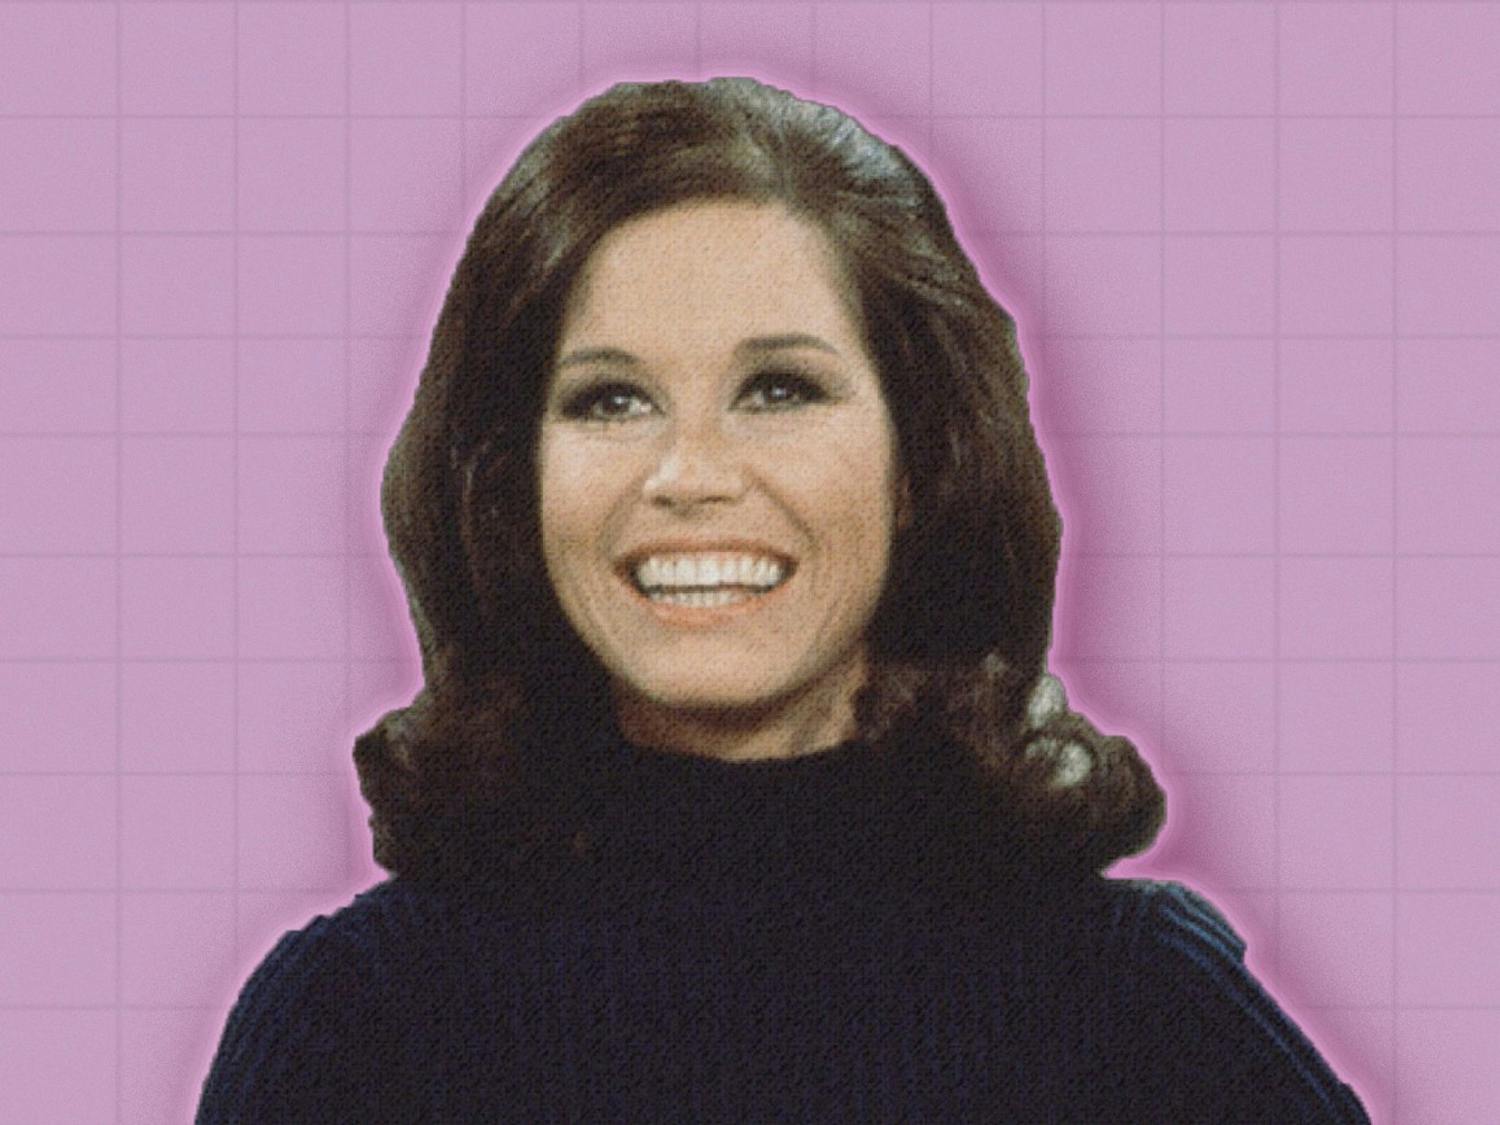 “The Mary Tyler Moore Show” was revolutionary for its time due to the main character’s refusal to marry or have children in service of her career.